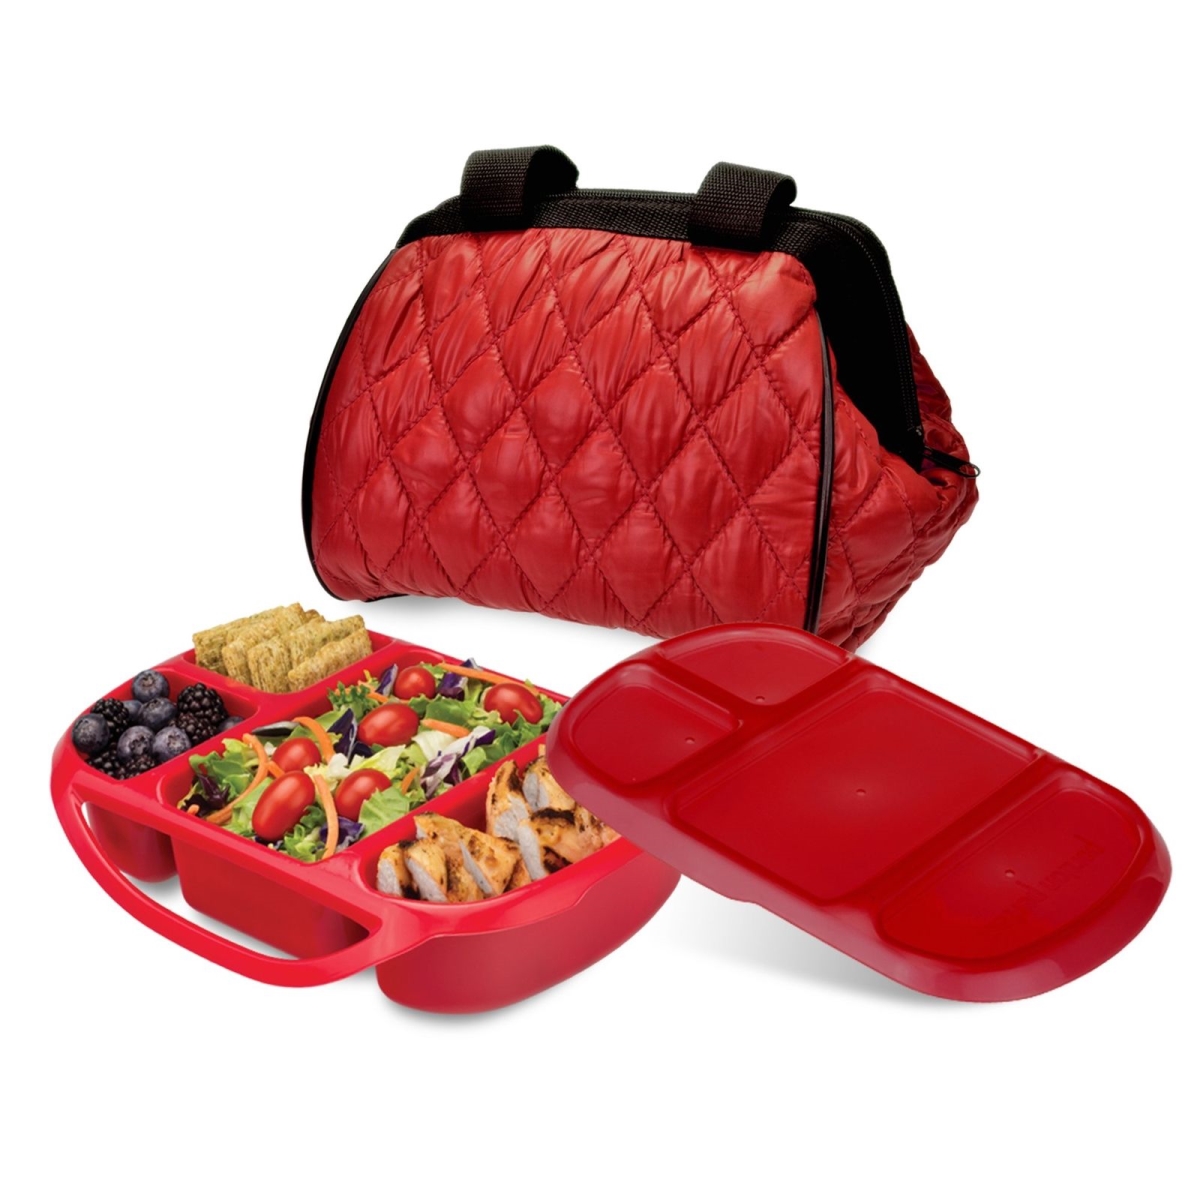 Pp1pbsr Portion Perfect Puffer Bag Set, Red